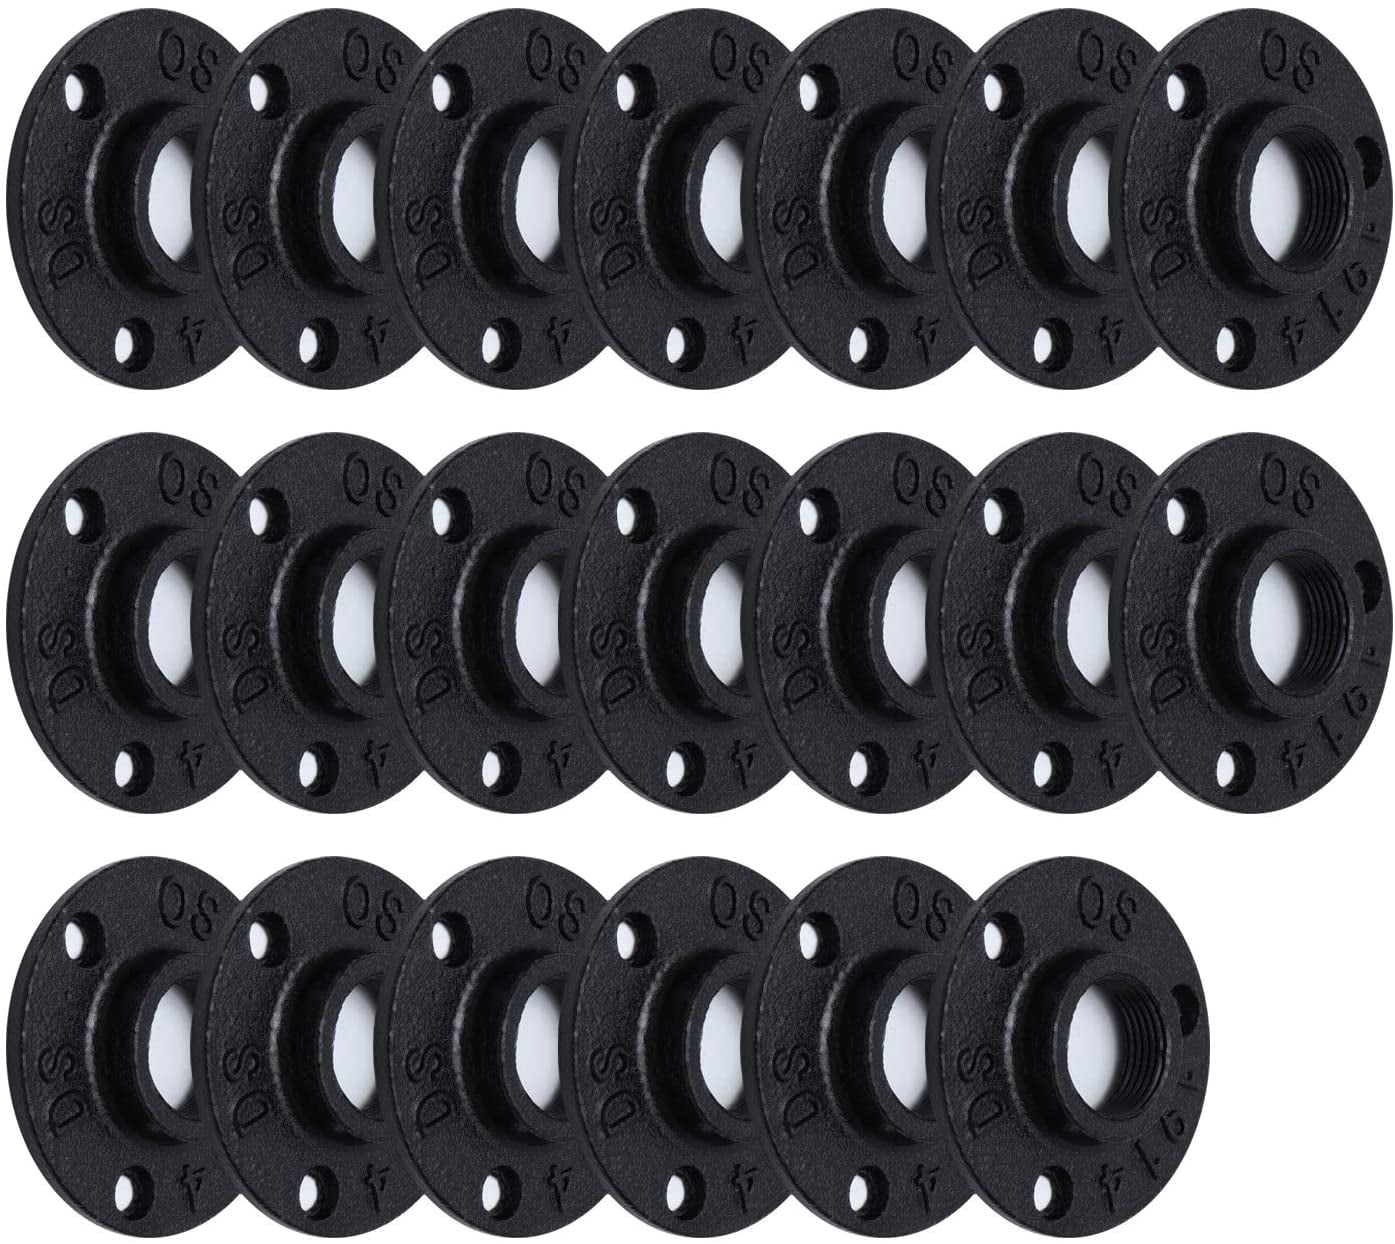 IRON PIPE FITTING NPT 3/4" BLACK MALLEABLE FLOOR FLANGE 50 Pieces 50 